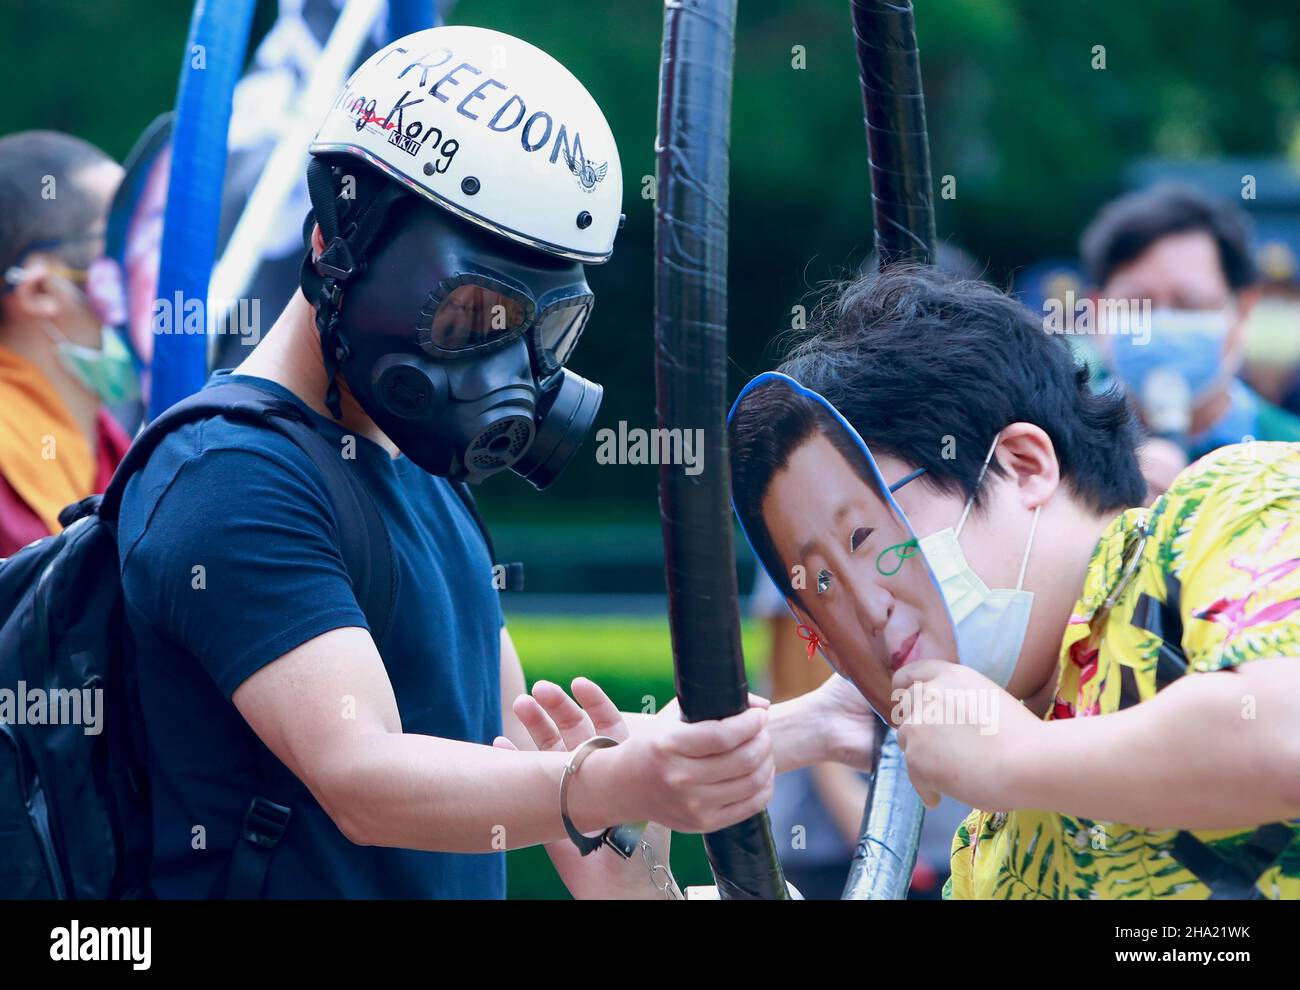 Taipei, Taipei, Taiwan. 10th Dec, 2021. A demonstrator wearing a mask with the face of Chinese president Xi Jinping handcuffs another protester with respirator, during a protest boycotting the Beijing Winter Games 2022, outside the Bank of China (Taipei Branch), following several diplomatic boycotts of the Games. The United States, Canada, UK, and Australia have pledged not to send officials to attend the Games as a mean to boycott the China, following the disappearance of Chinese tennis player Peng Shuai and human rights crackdowns on Hong Kong and Xinjiang. (Credit Image: © Daniel Ceng Sh Stock Photo